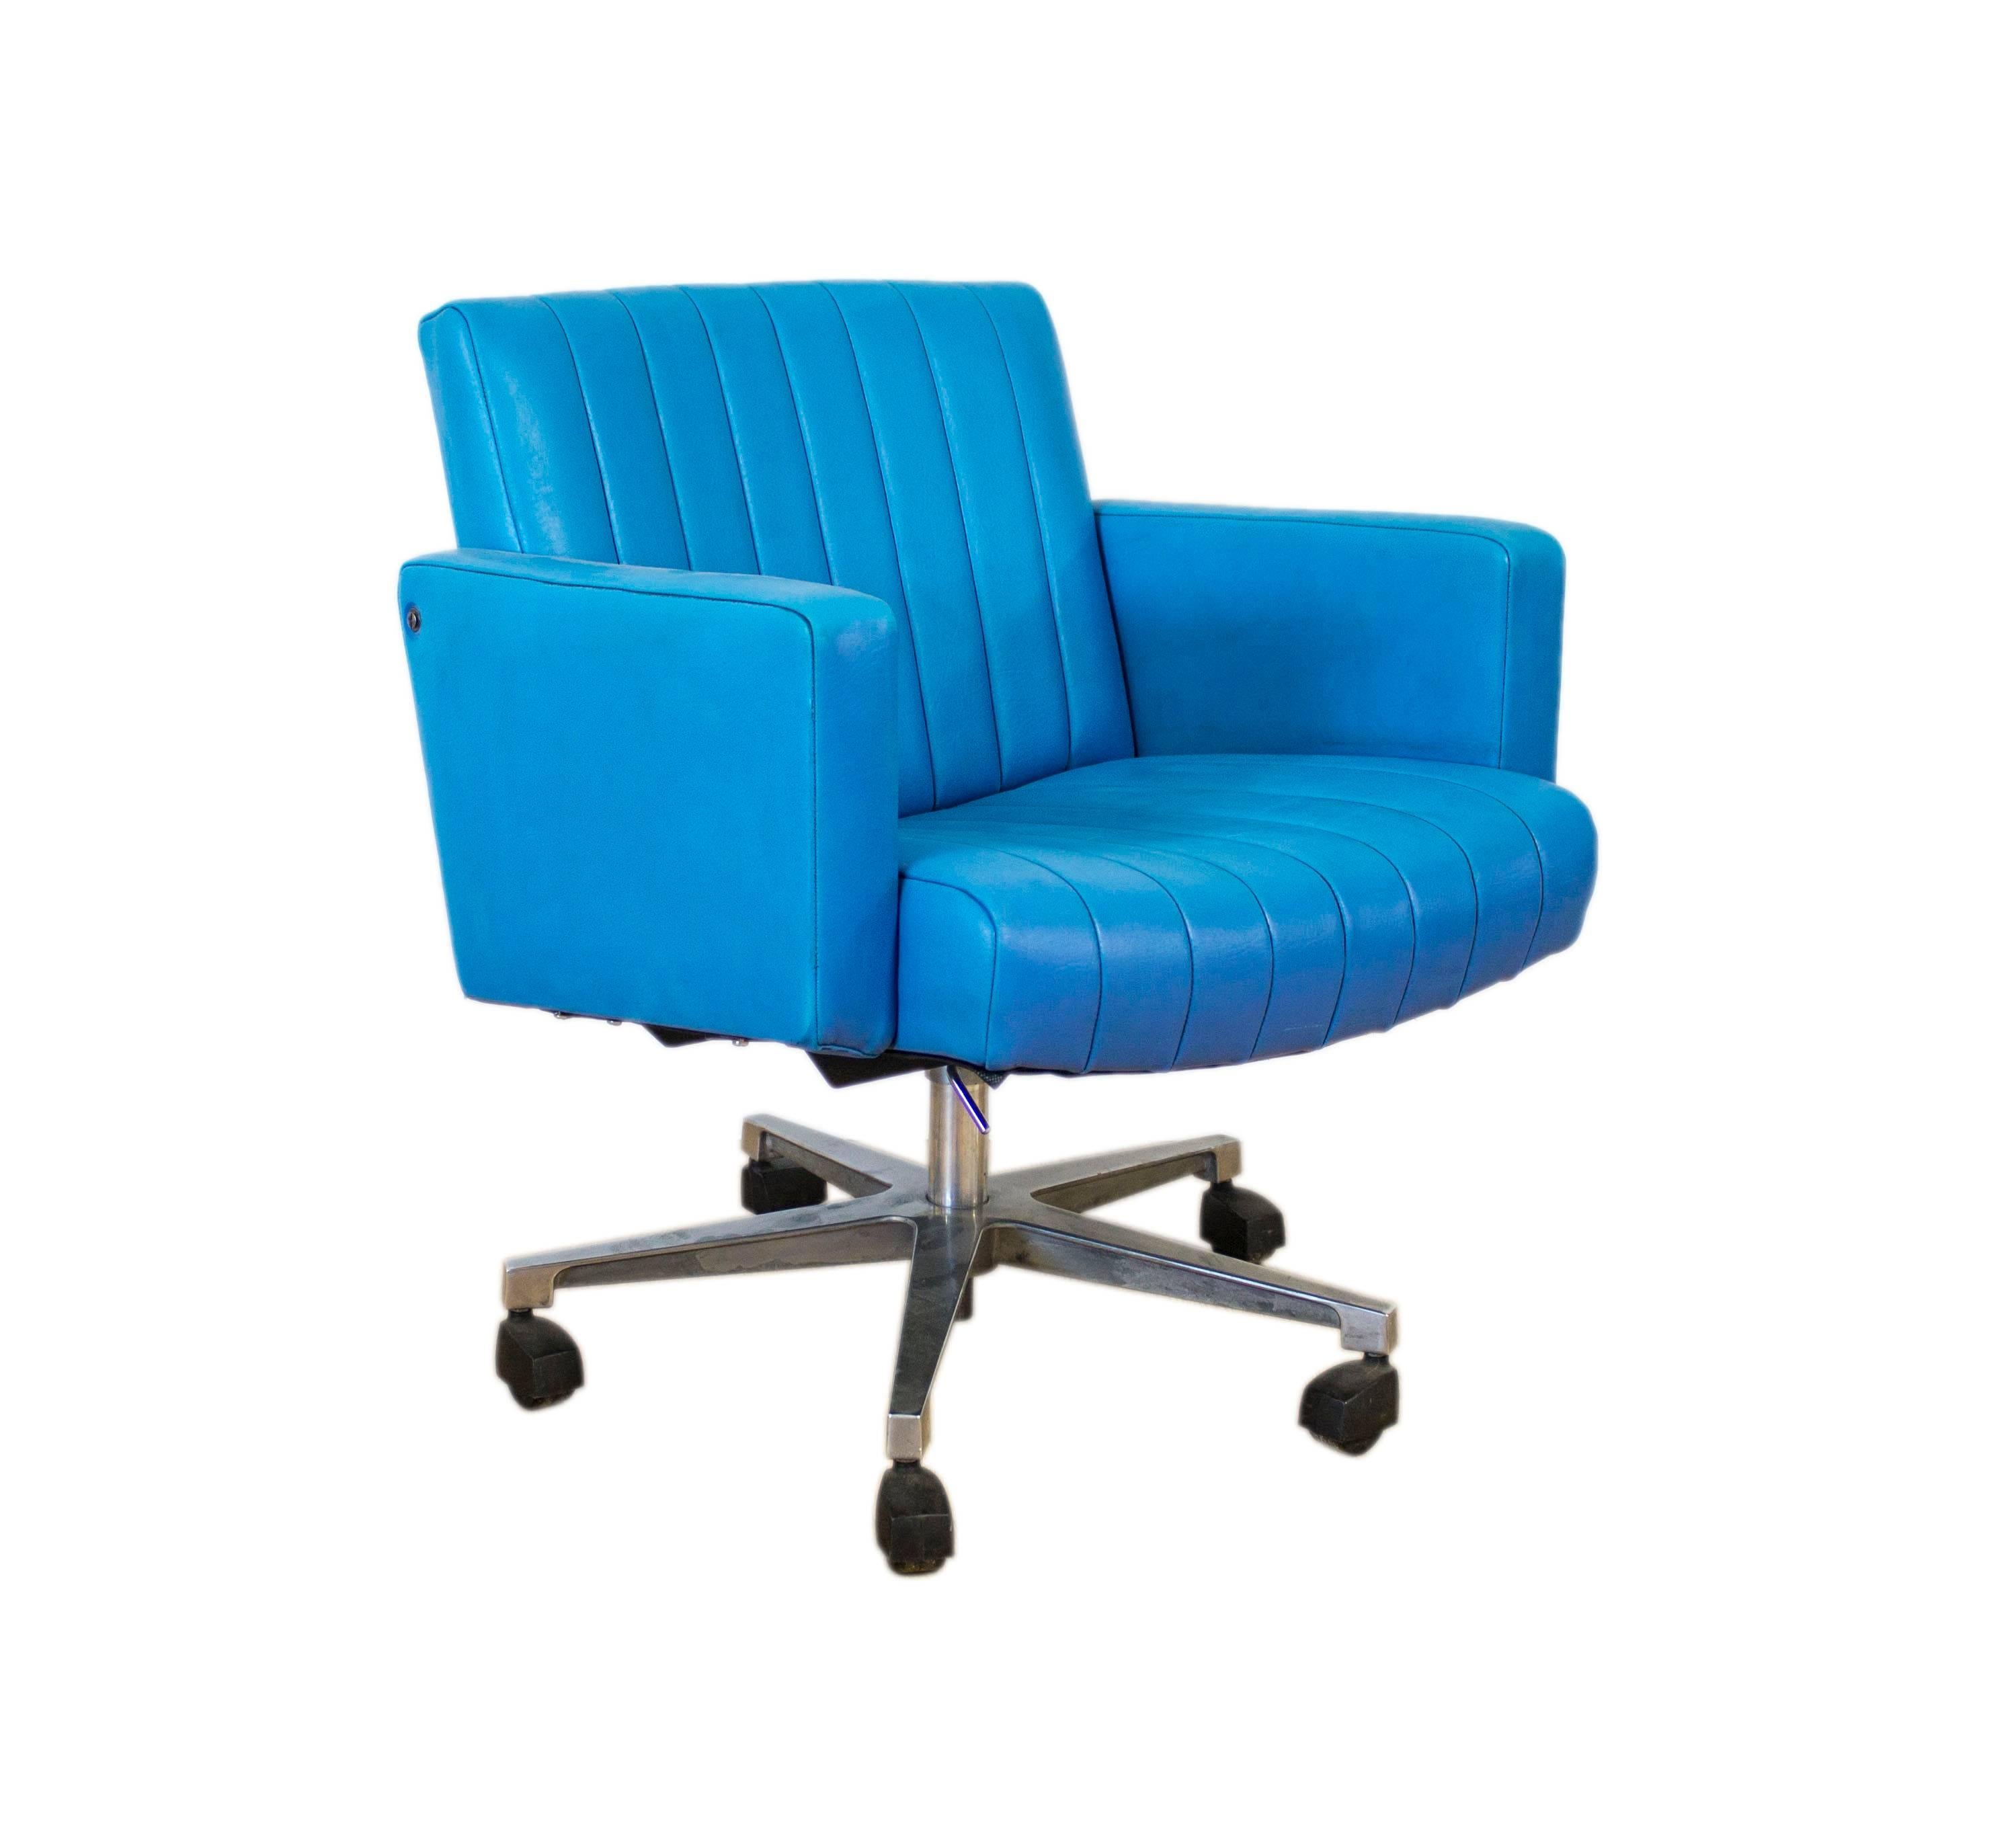 Turquoise Leather Swivel Armchair Desk Chair Retro G Plan Eames Era In Excellent Condition For Sale In Greater Manchester, GB